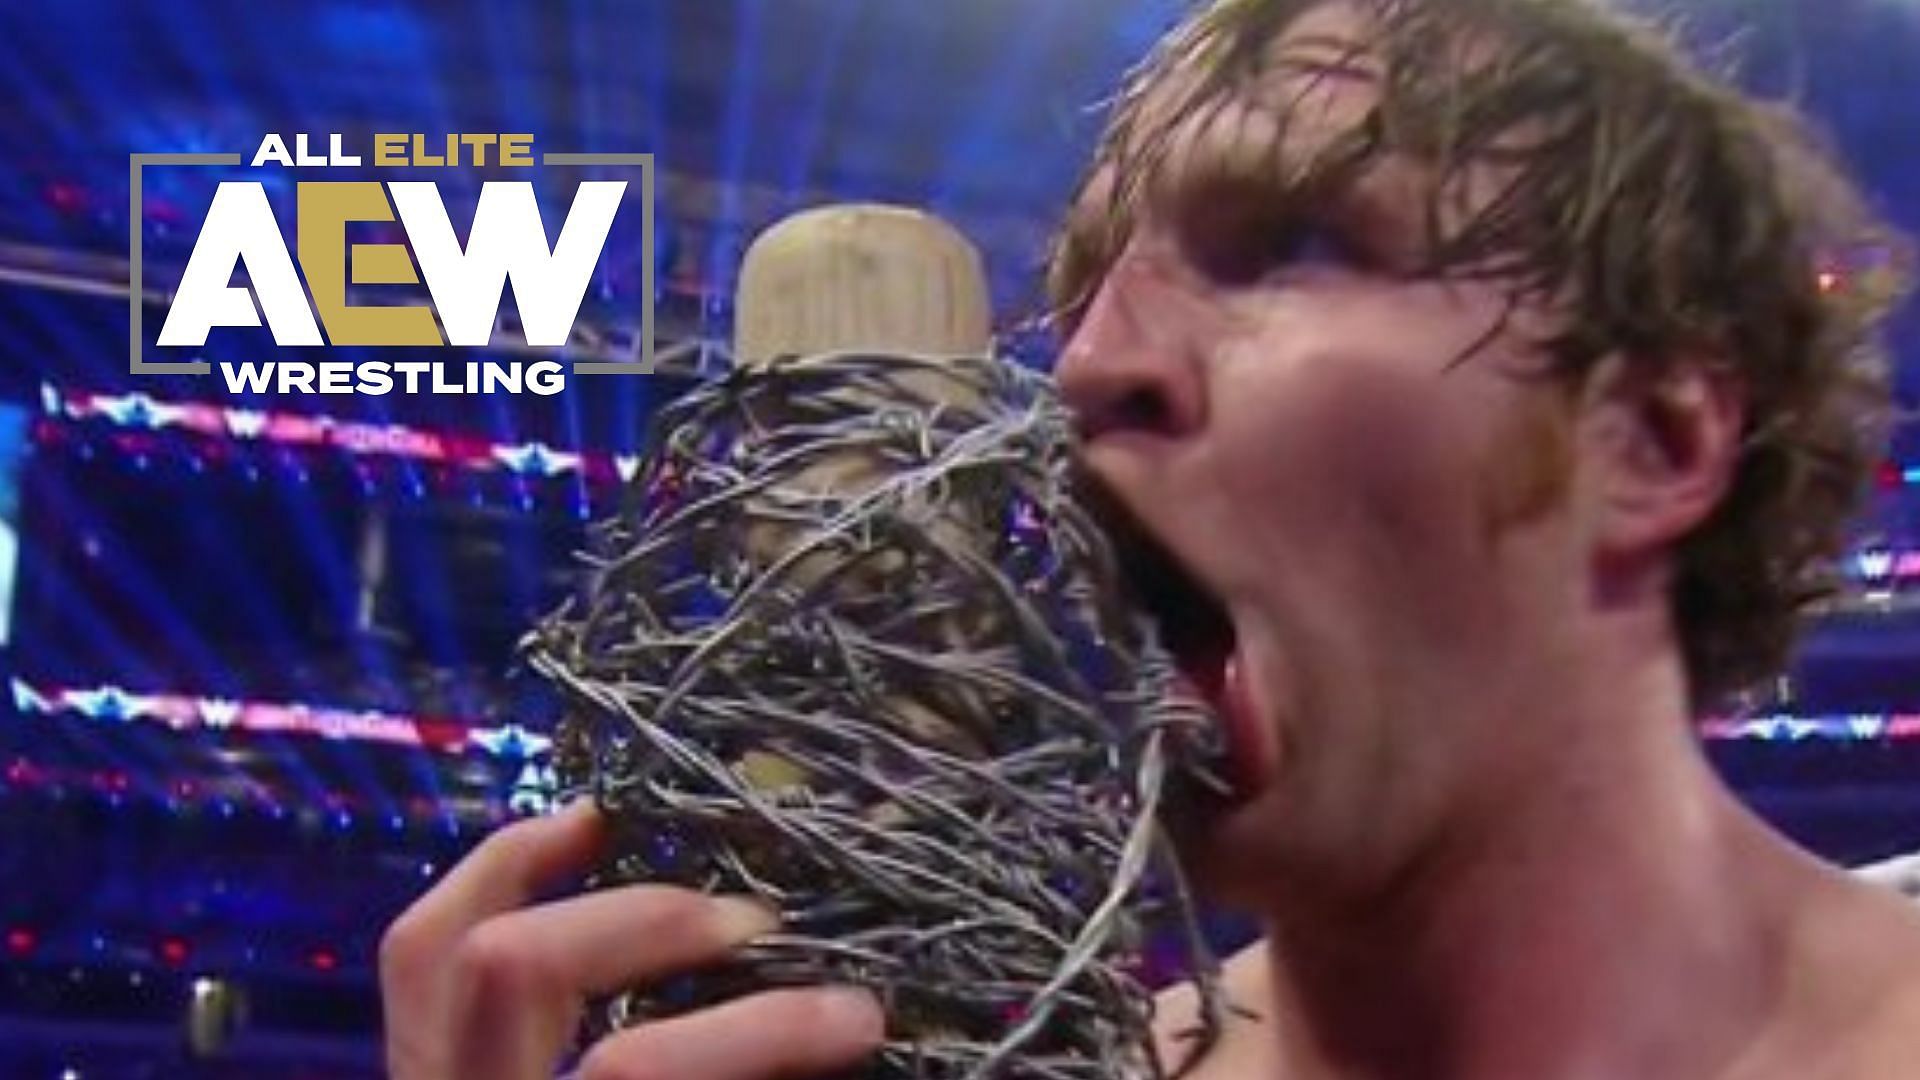 A WWE legend has poked fun at one of Jon Moxley